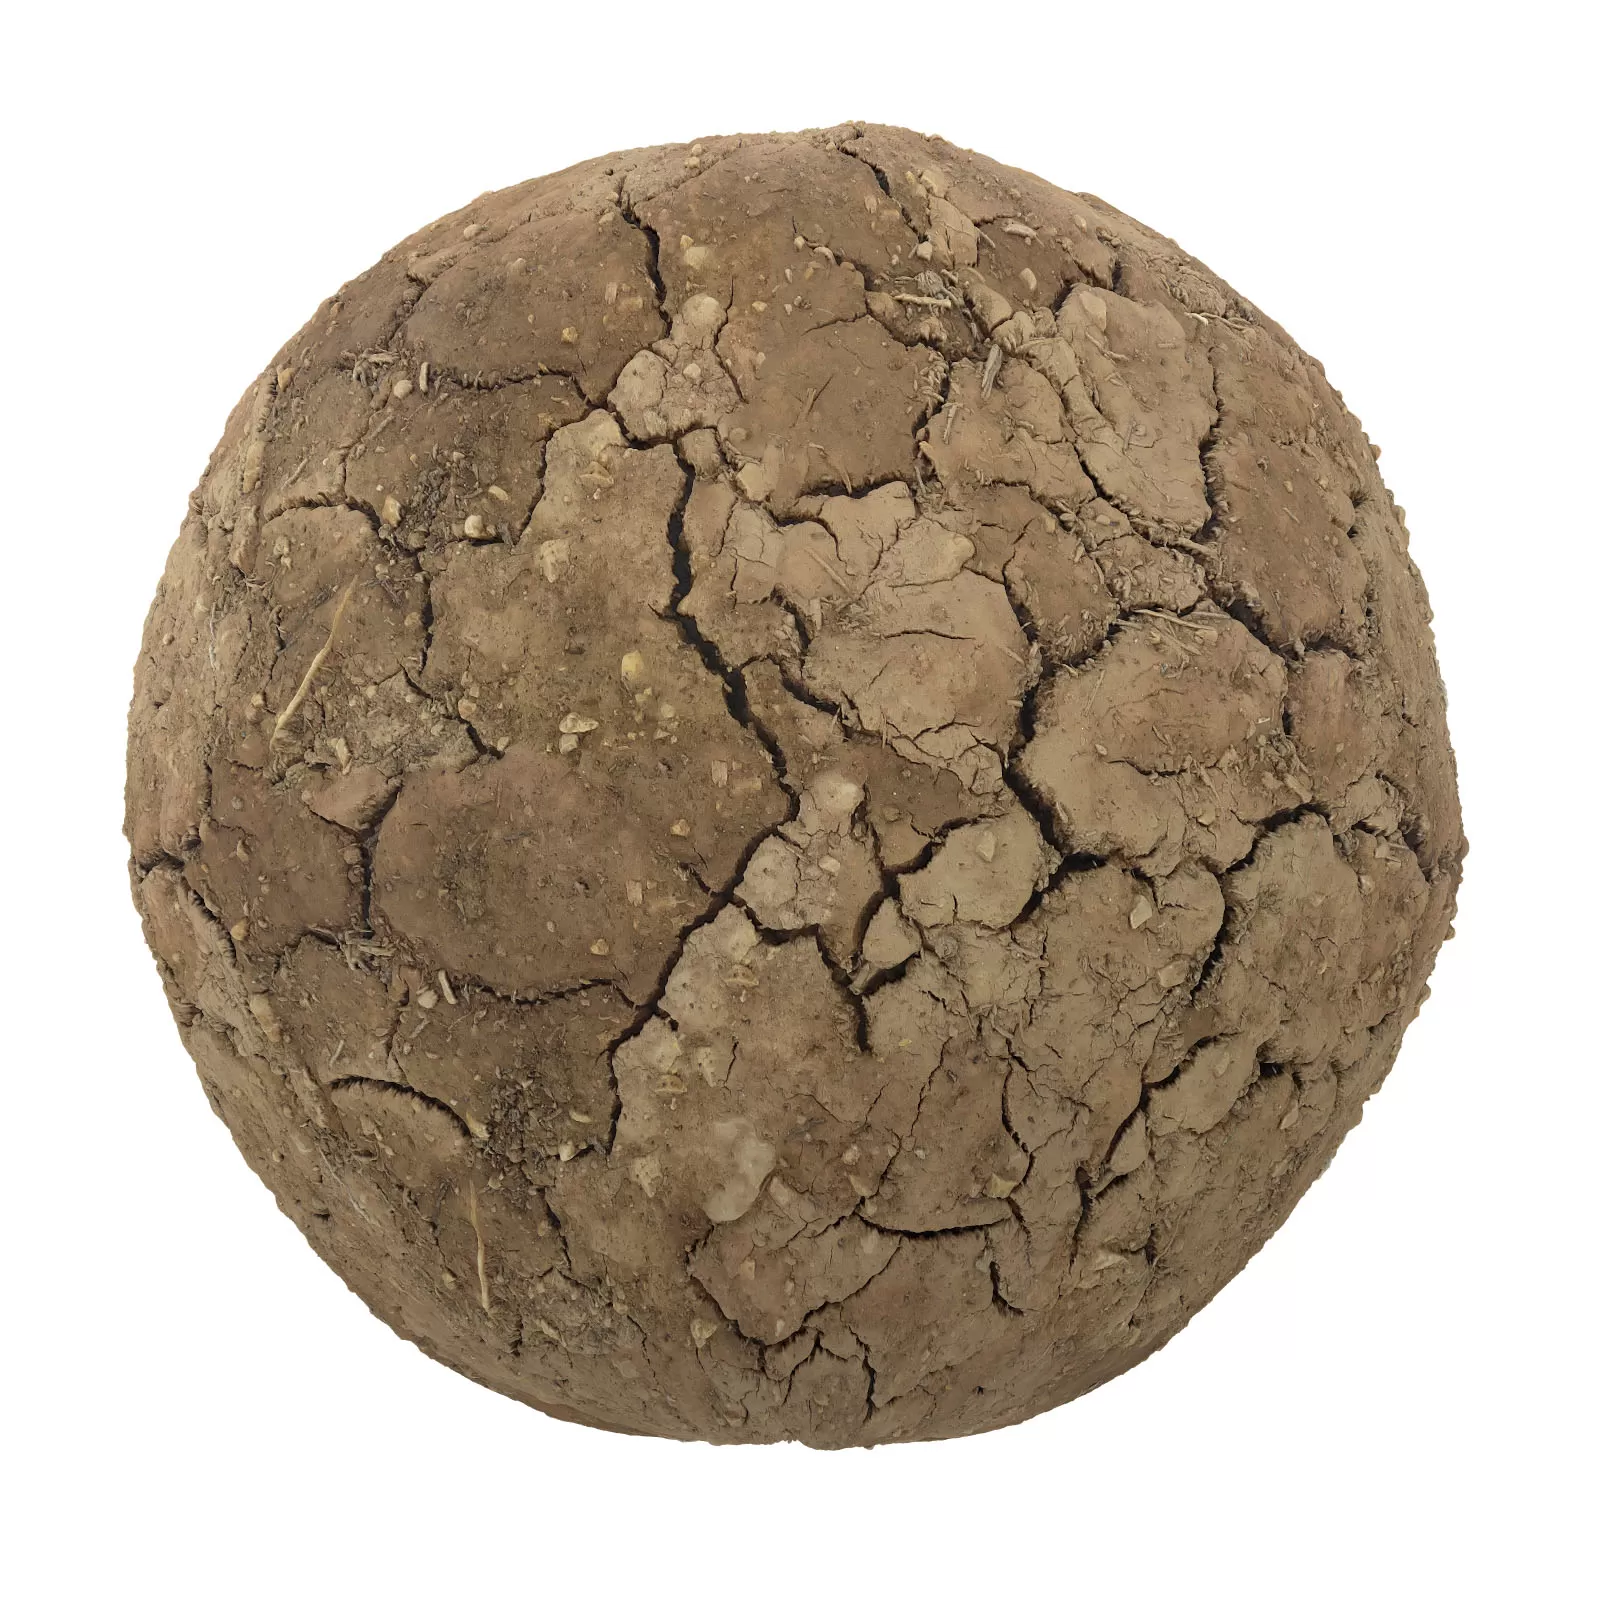 PBR CGAXIS TEXTURES – SOIL – Dry Cracked Dirt 4